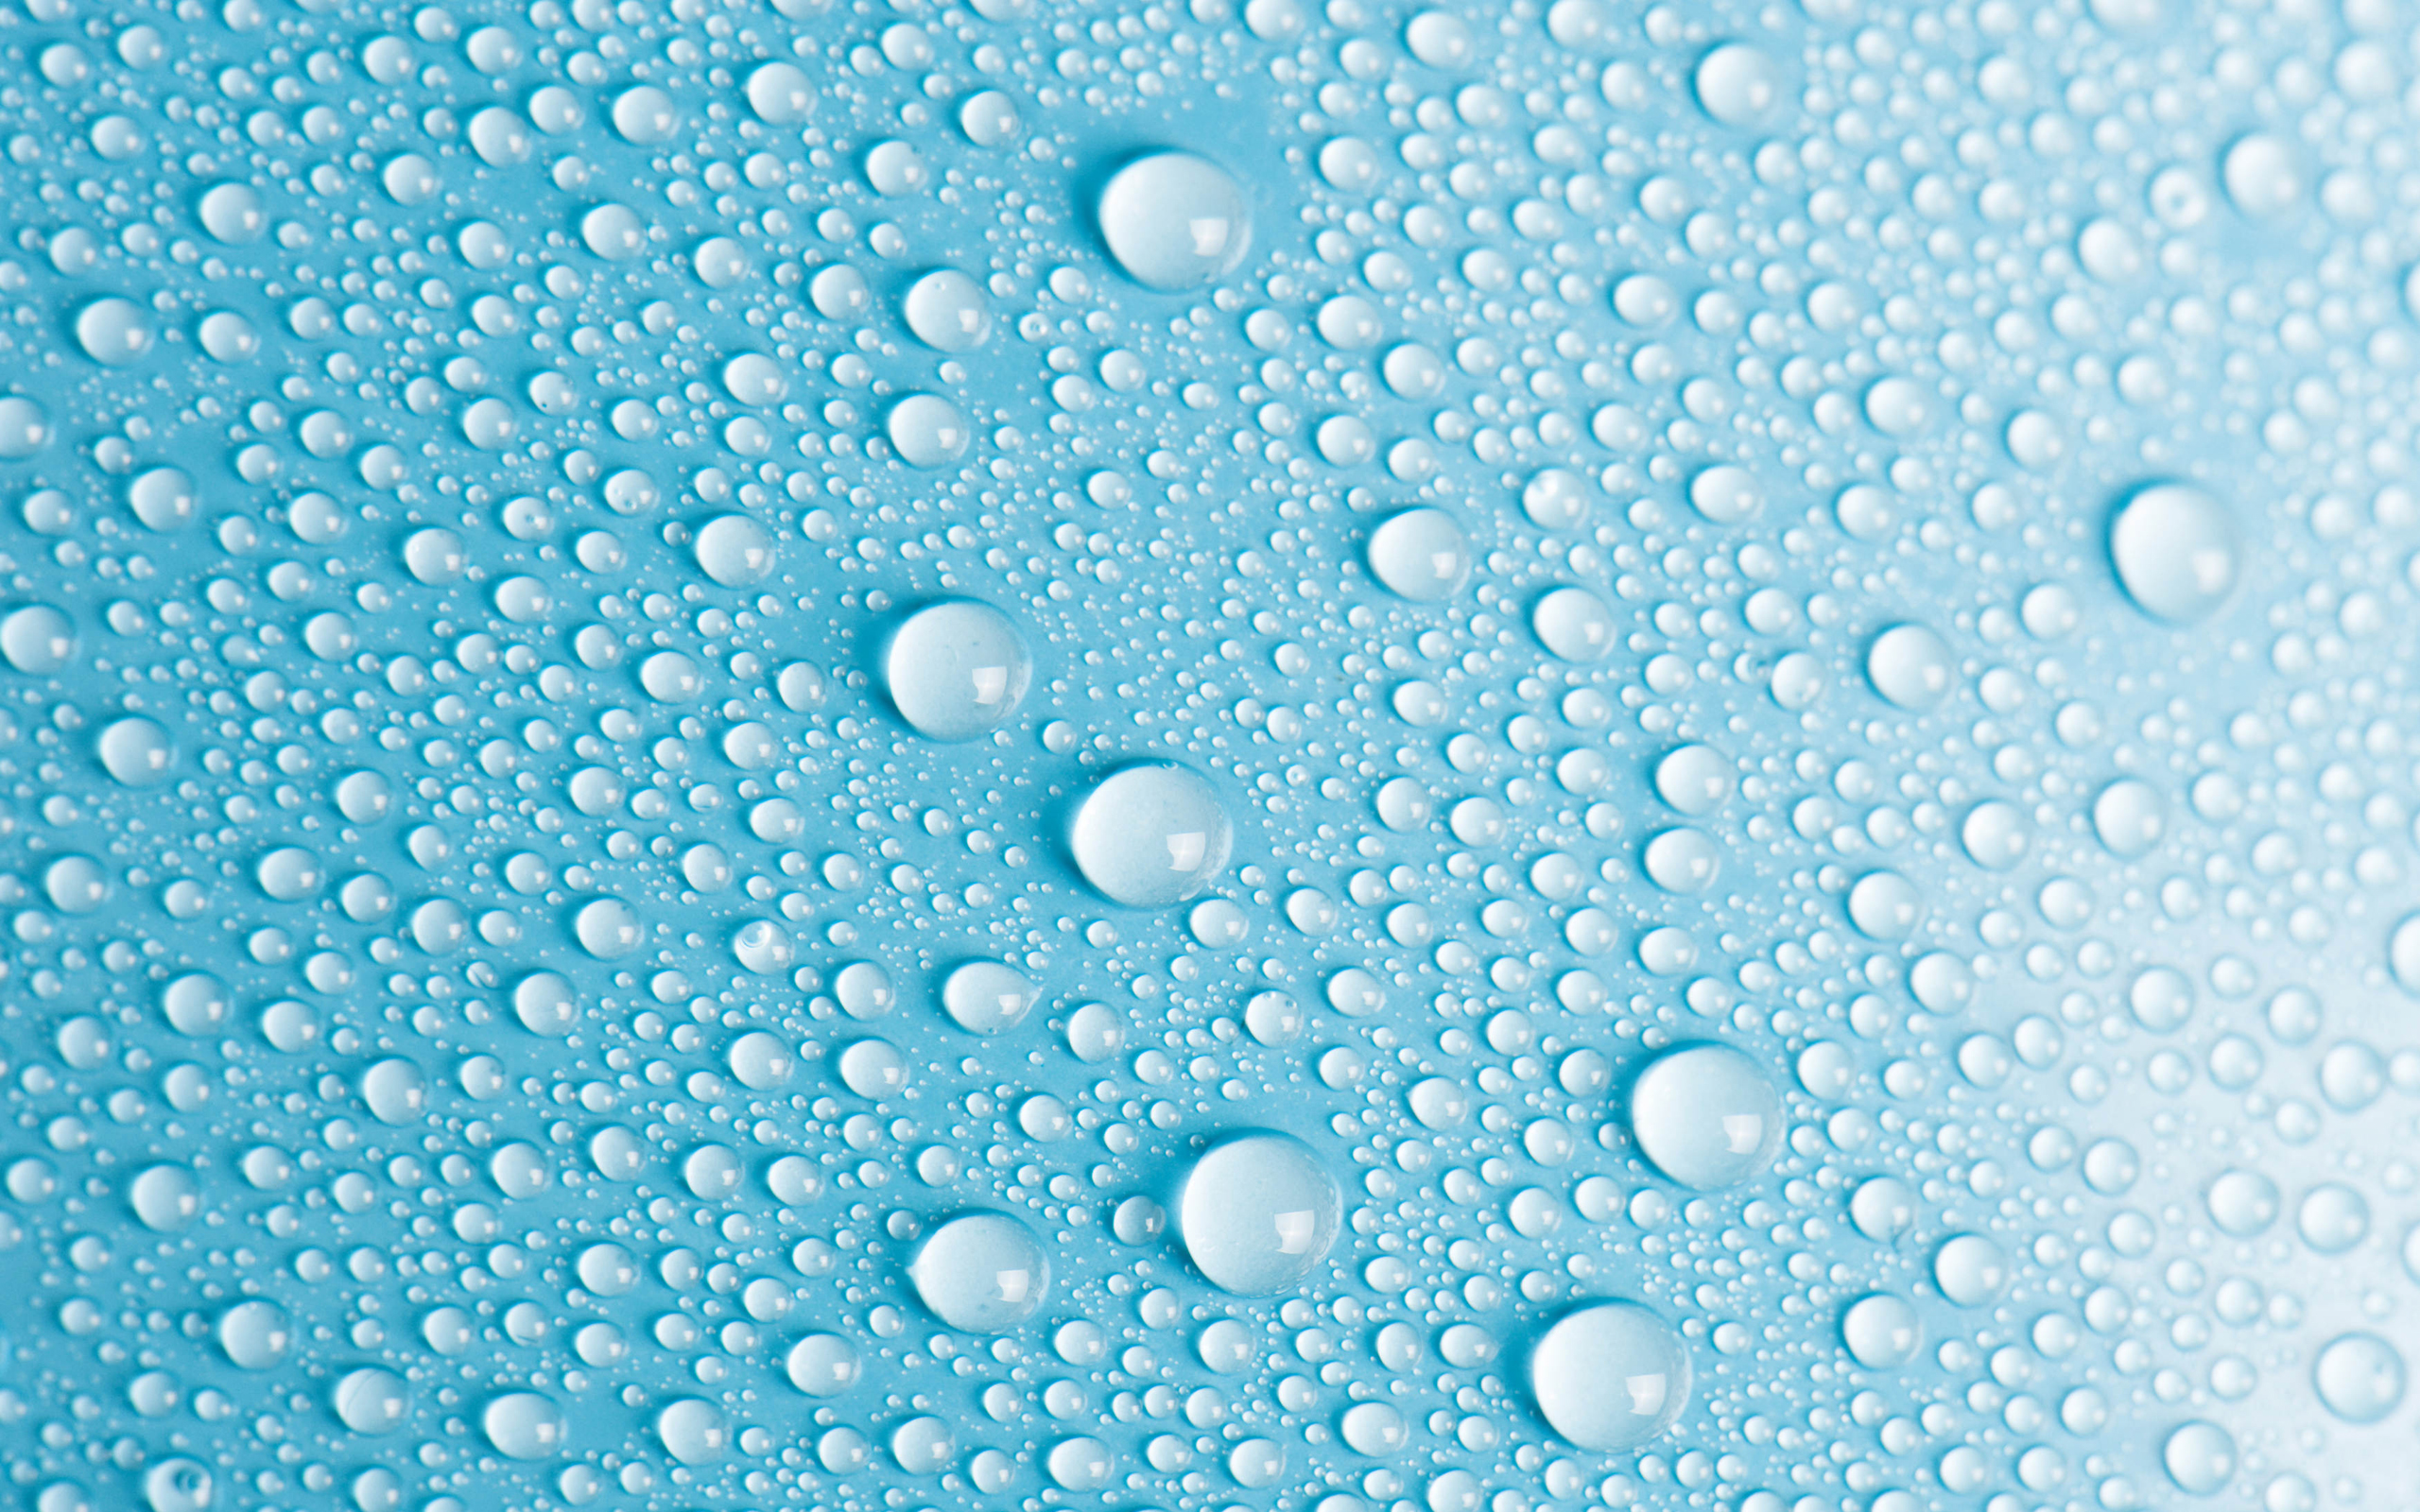 Download the following Fantastic Water Drops Wallpaper 3516 by clicking the button positioned underneath the "Download Wallpaper" section.